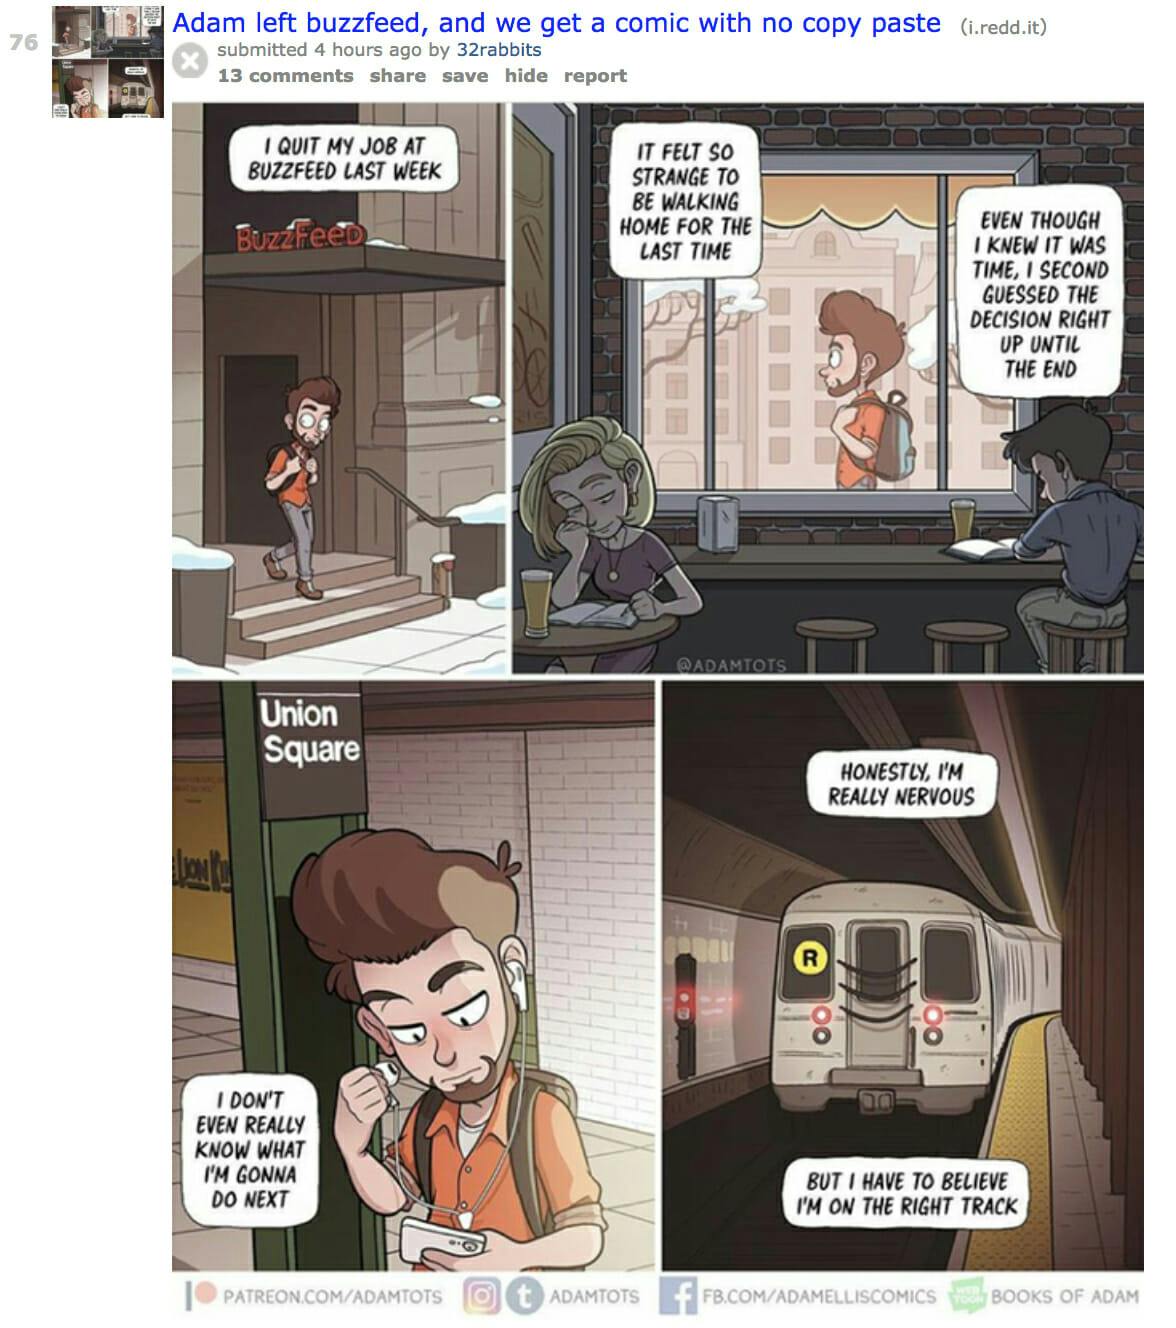 Adam Ellis, the illustrator behind the 'Dear David' ghost saga, created a comic about leaving his job at BuzzFeed.